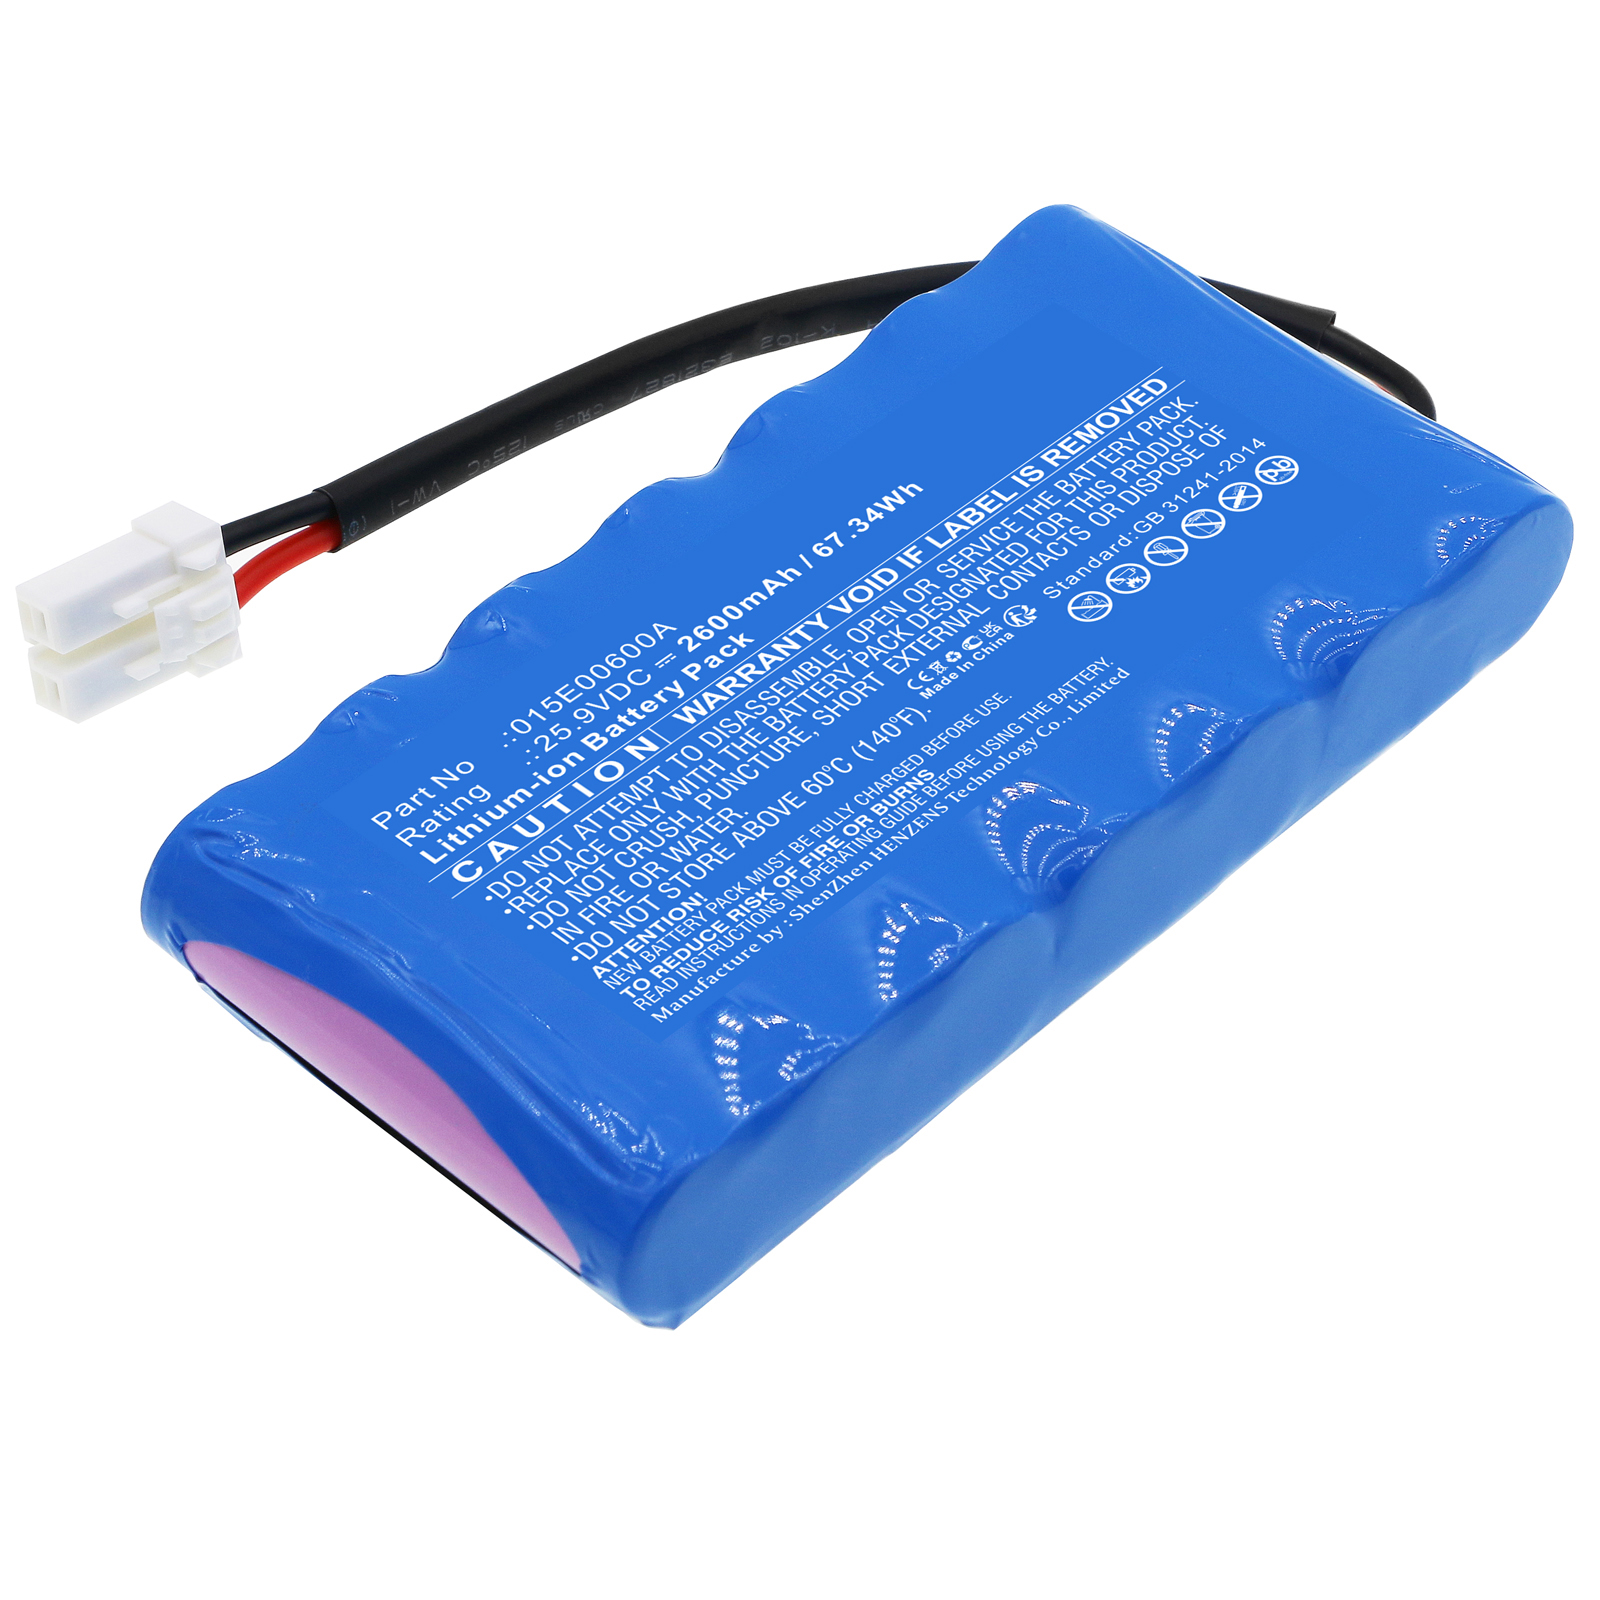 Synergy Digital Lawn Mower Battery, Compatible with Ambrogio 015E00600A Lawn Mower Battery (Li-ion, 25.9V, 2600mAh)